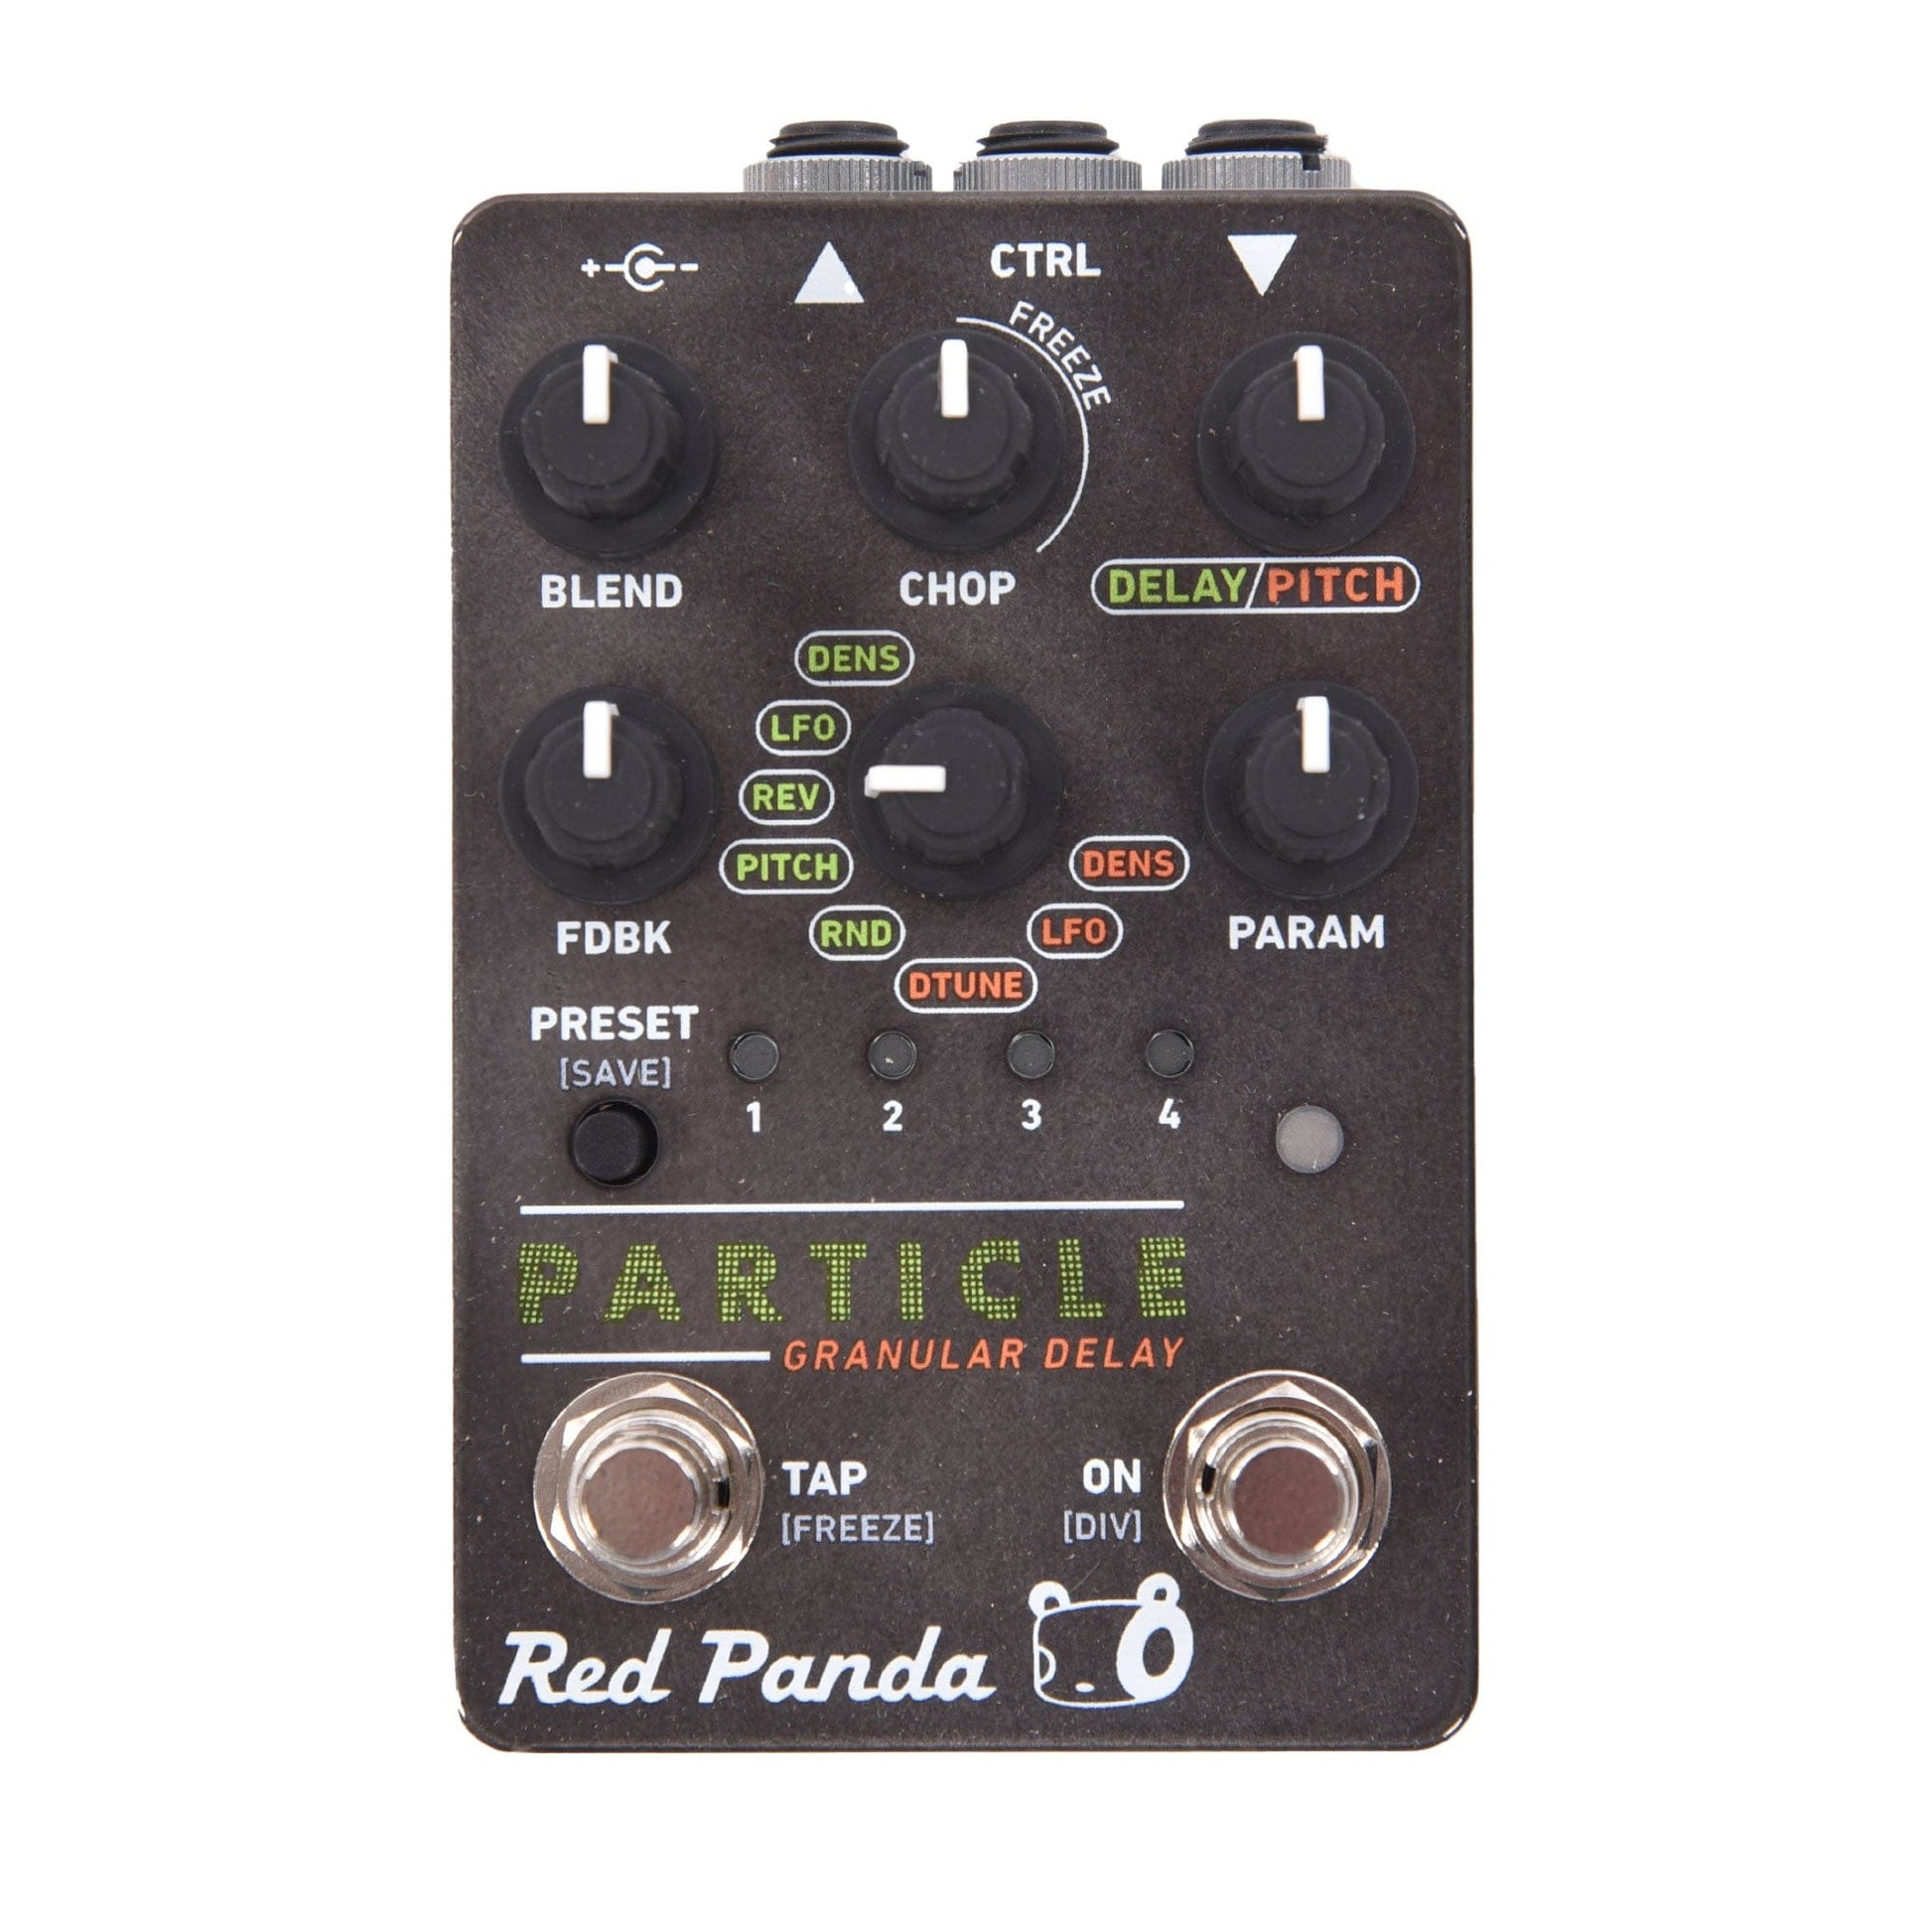 Red Panda Particle 2 Granular Delay Pitch Shifter Ghost Black Orange Grey Effects and Pedals / Octave and Pitch